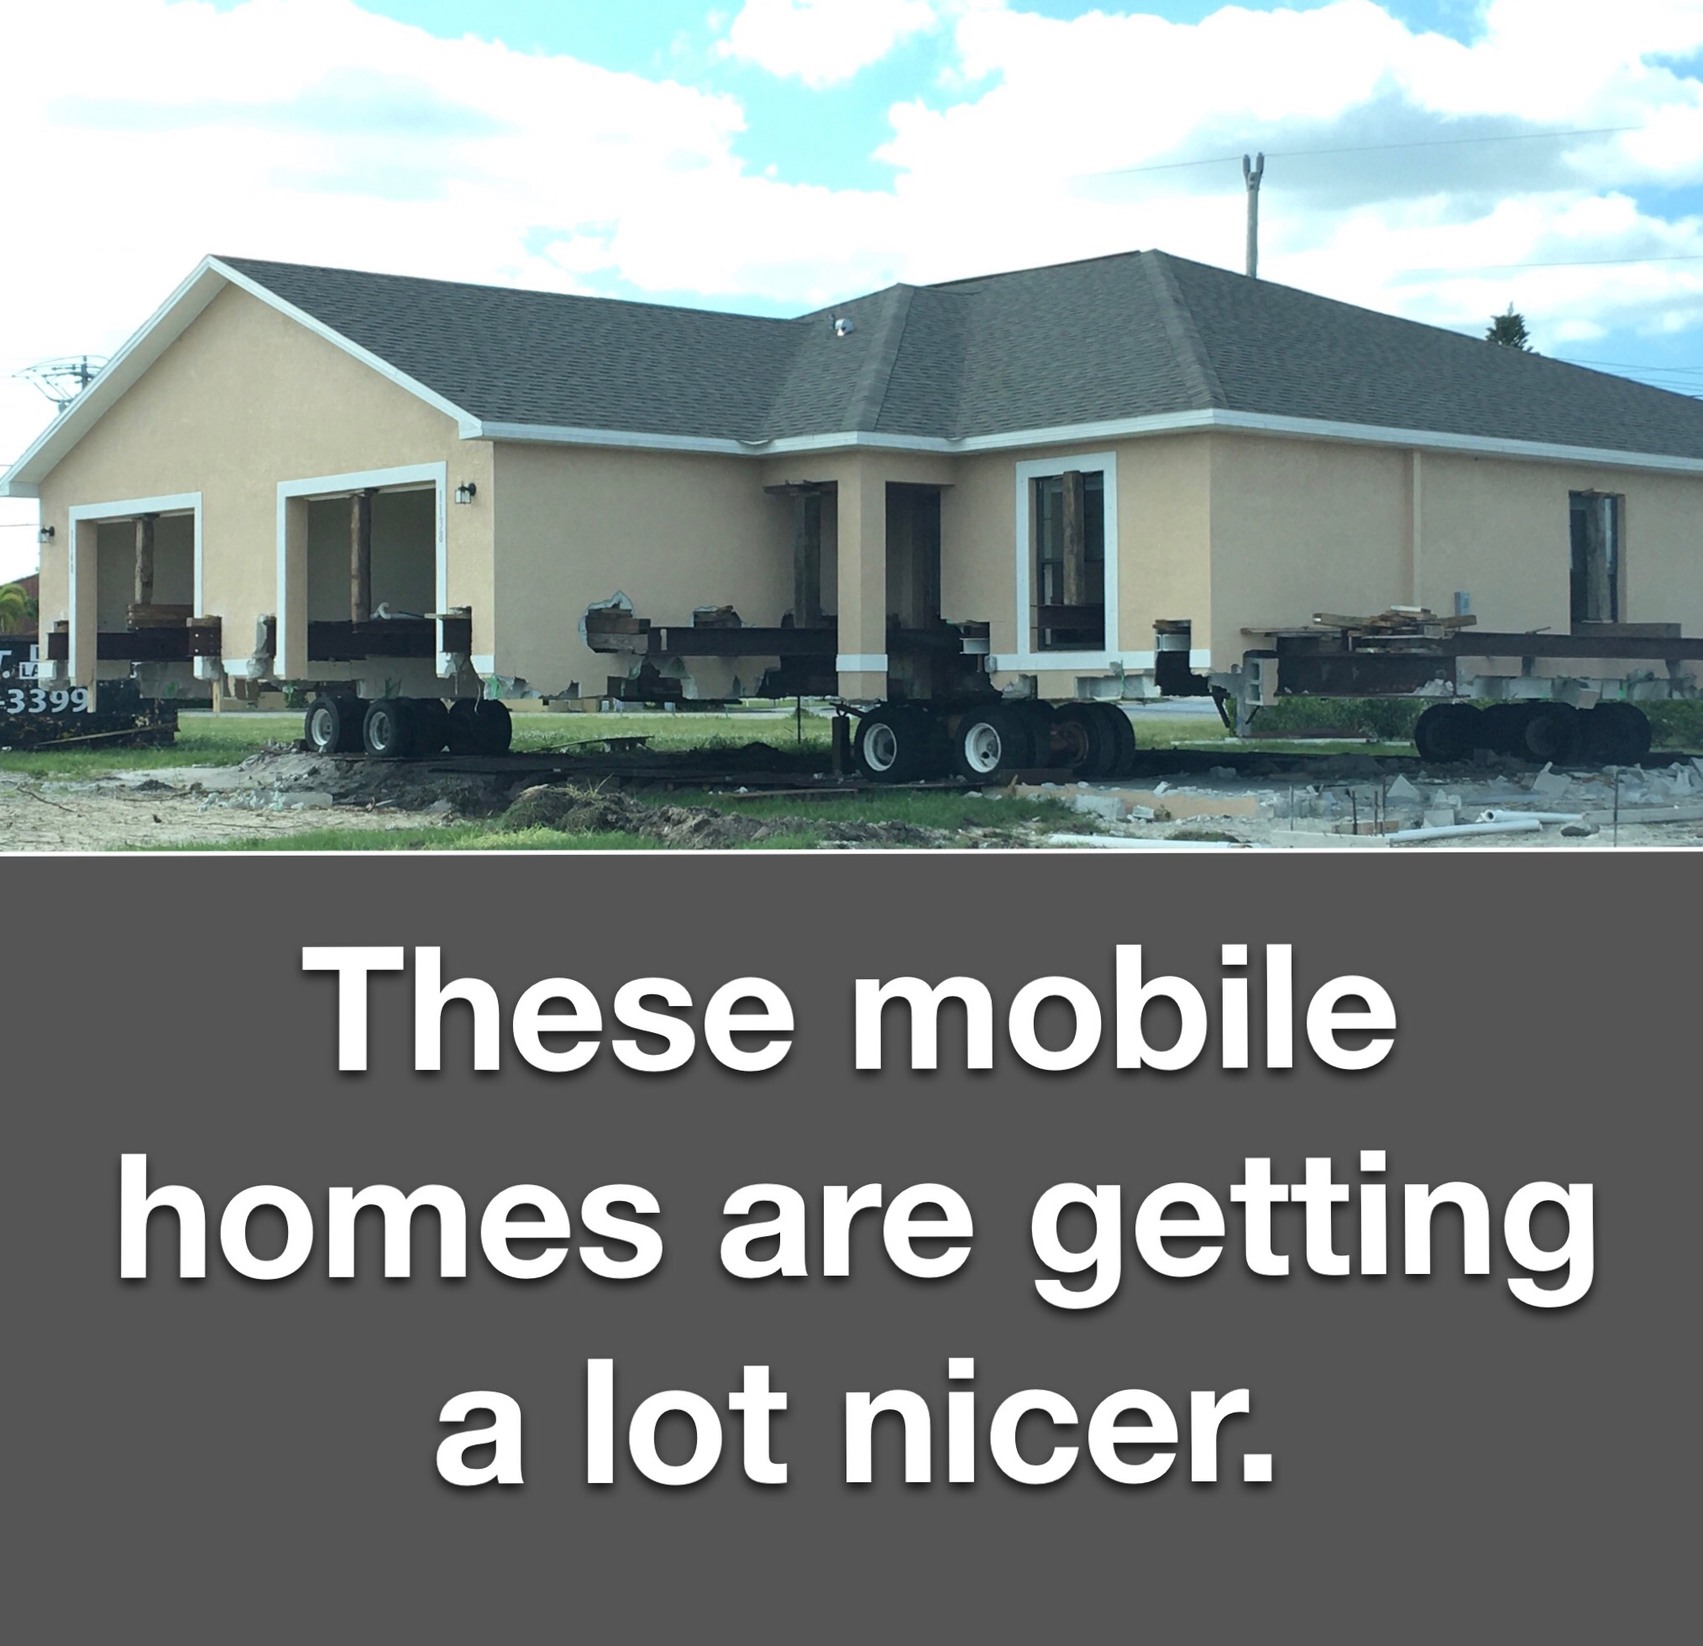 wanna move? don’t wanna pack? try a mobile house! - meme